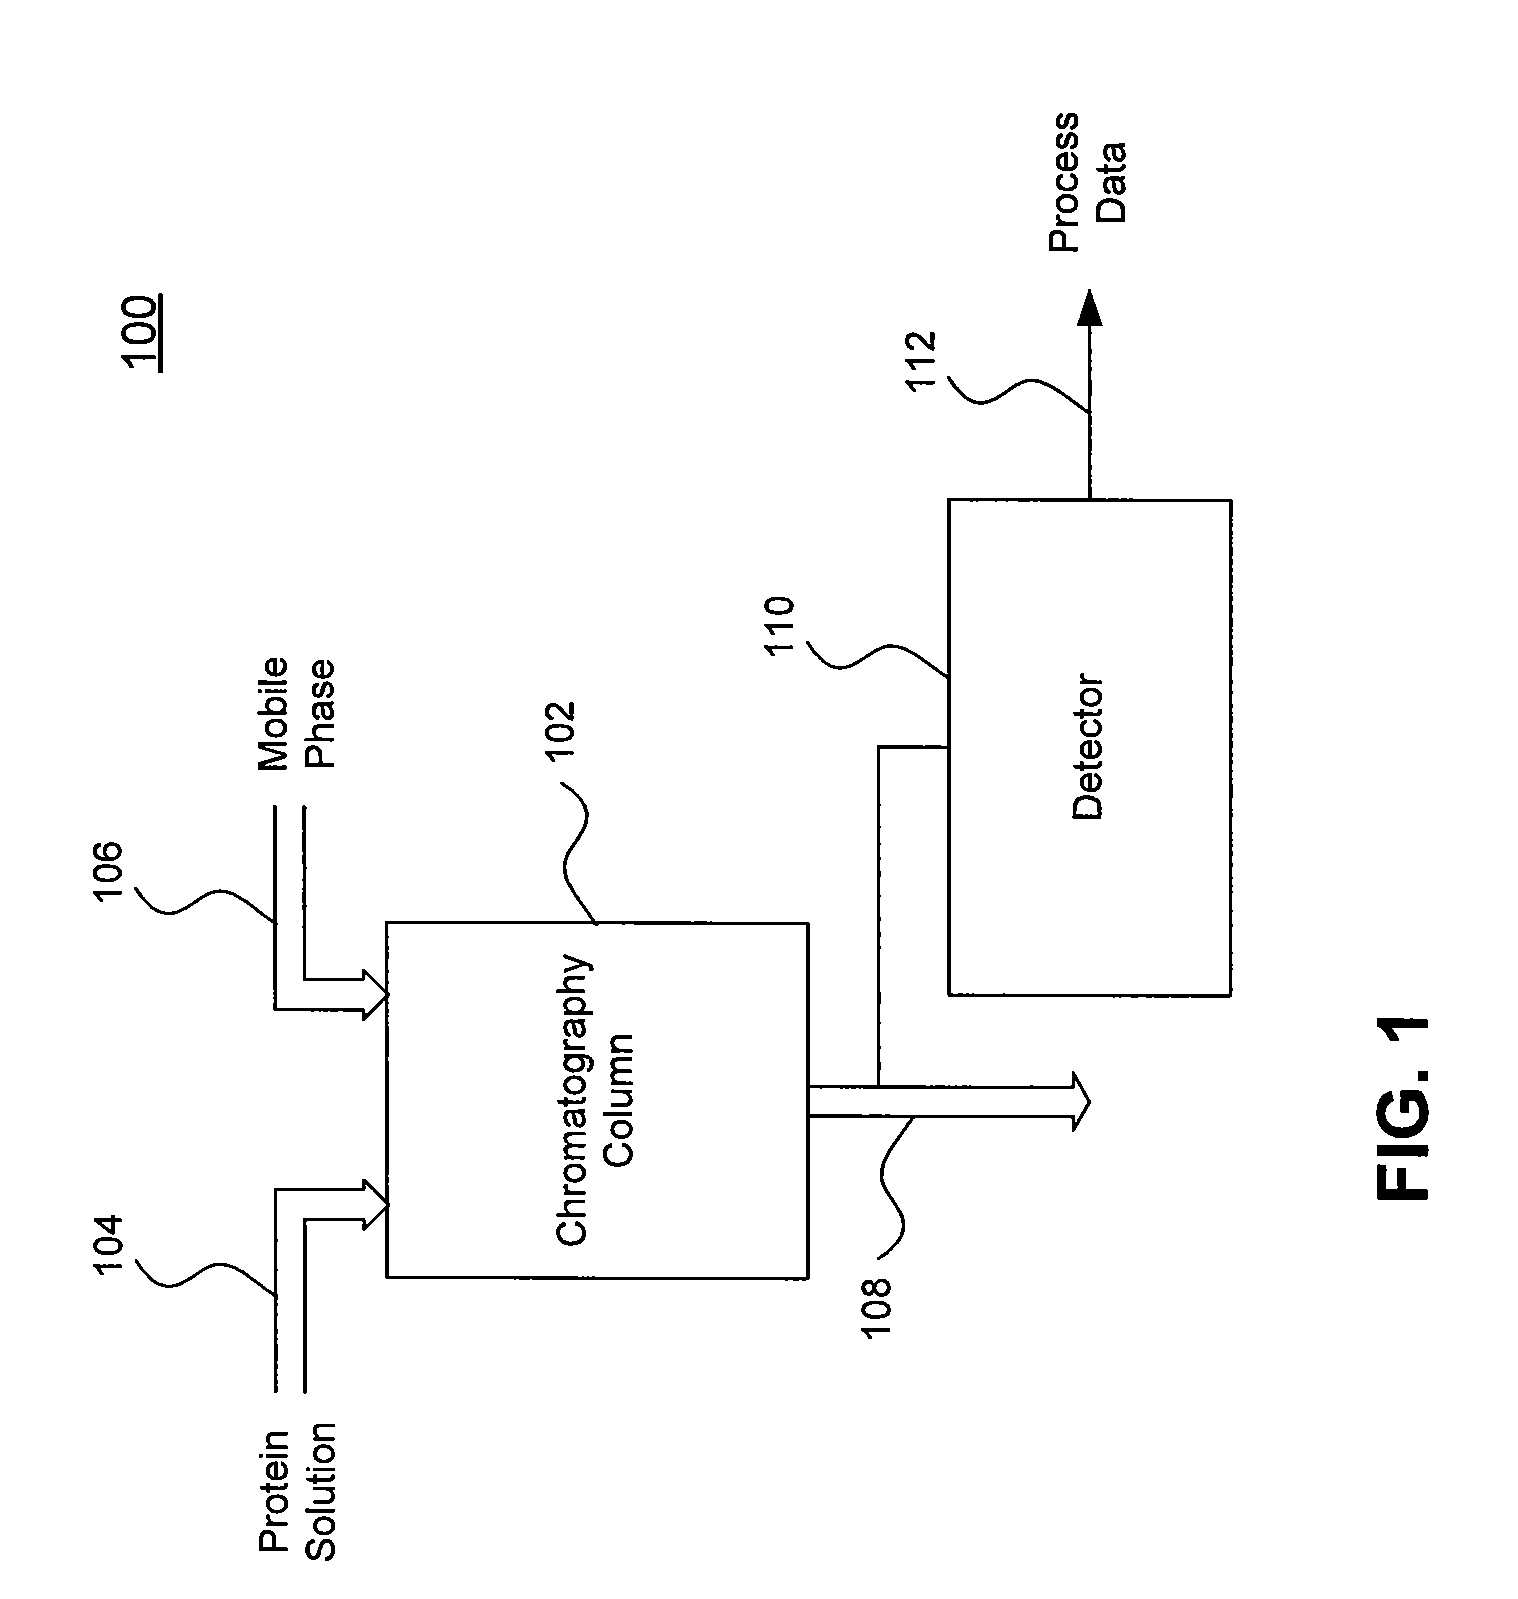 Systems and Methods for Evaluating Chromatography Column Performance